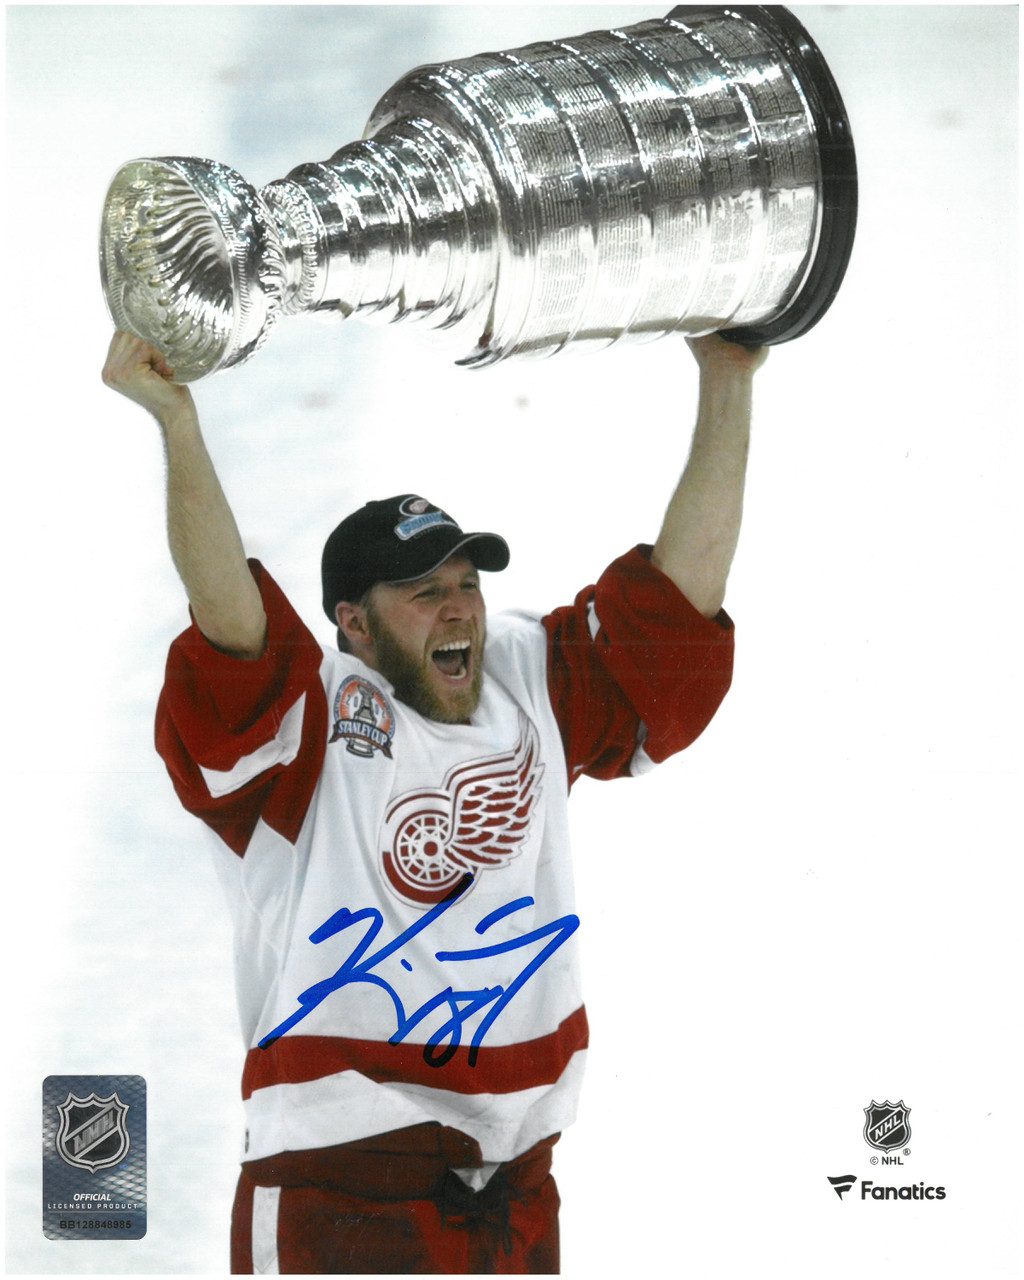 Kirk Maltby Autographed Detroit Red Wings 16x20 Photo #1 - 1997